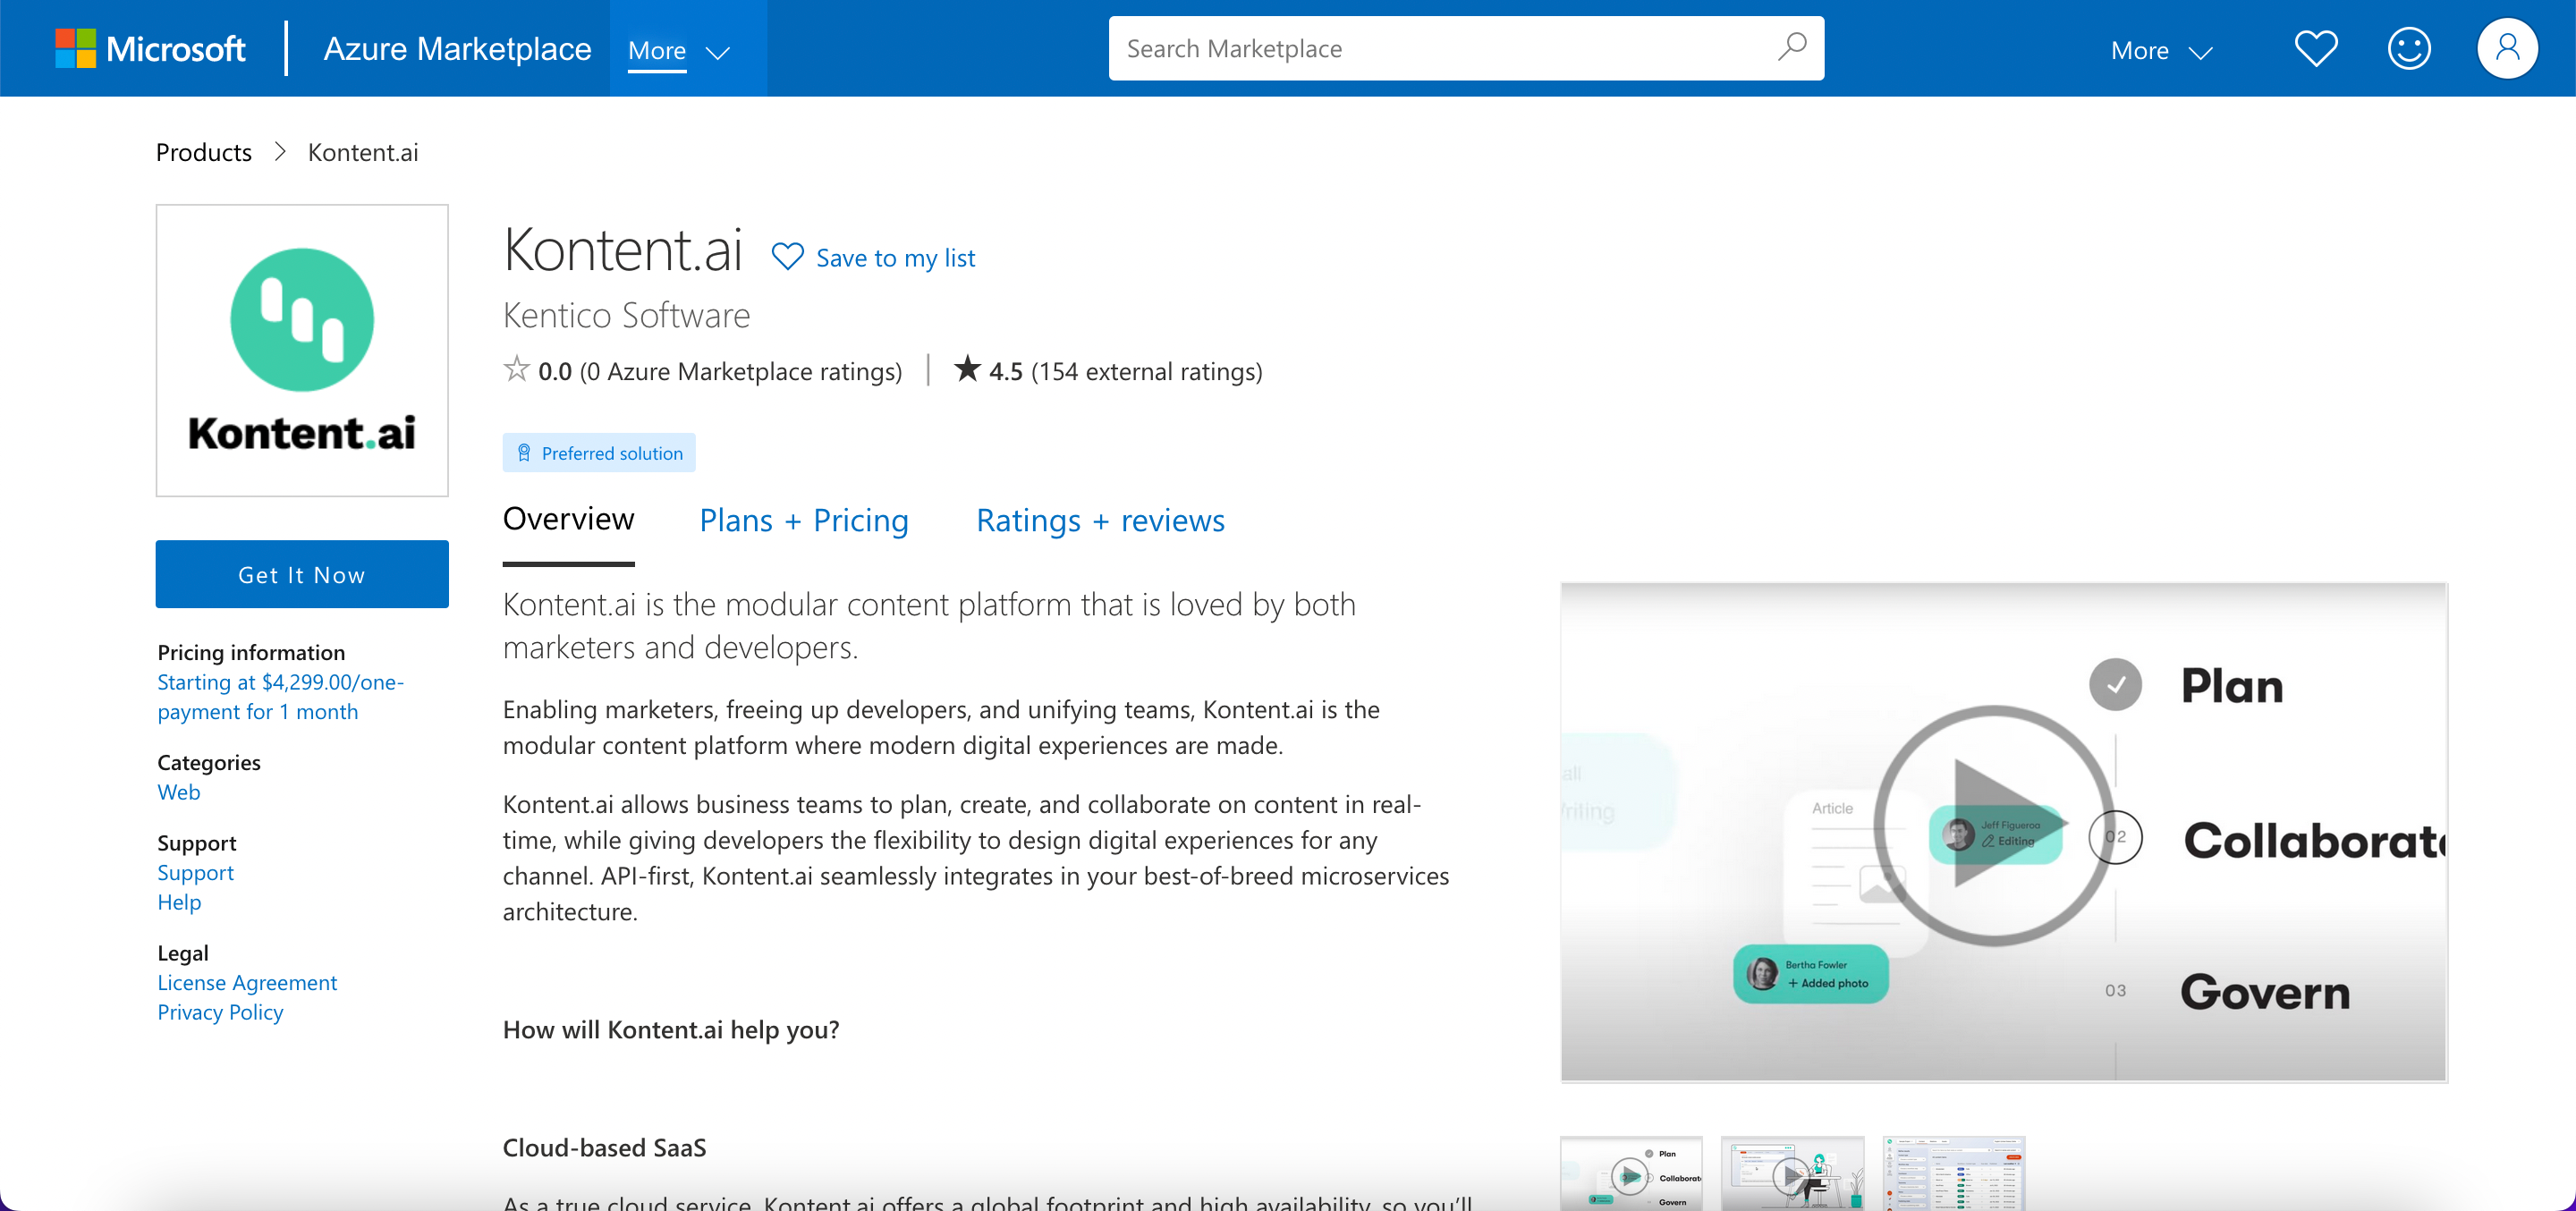 Kontent.ai is a transactable solution on Microsoft’s Azure Marketplace